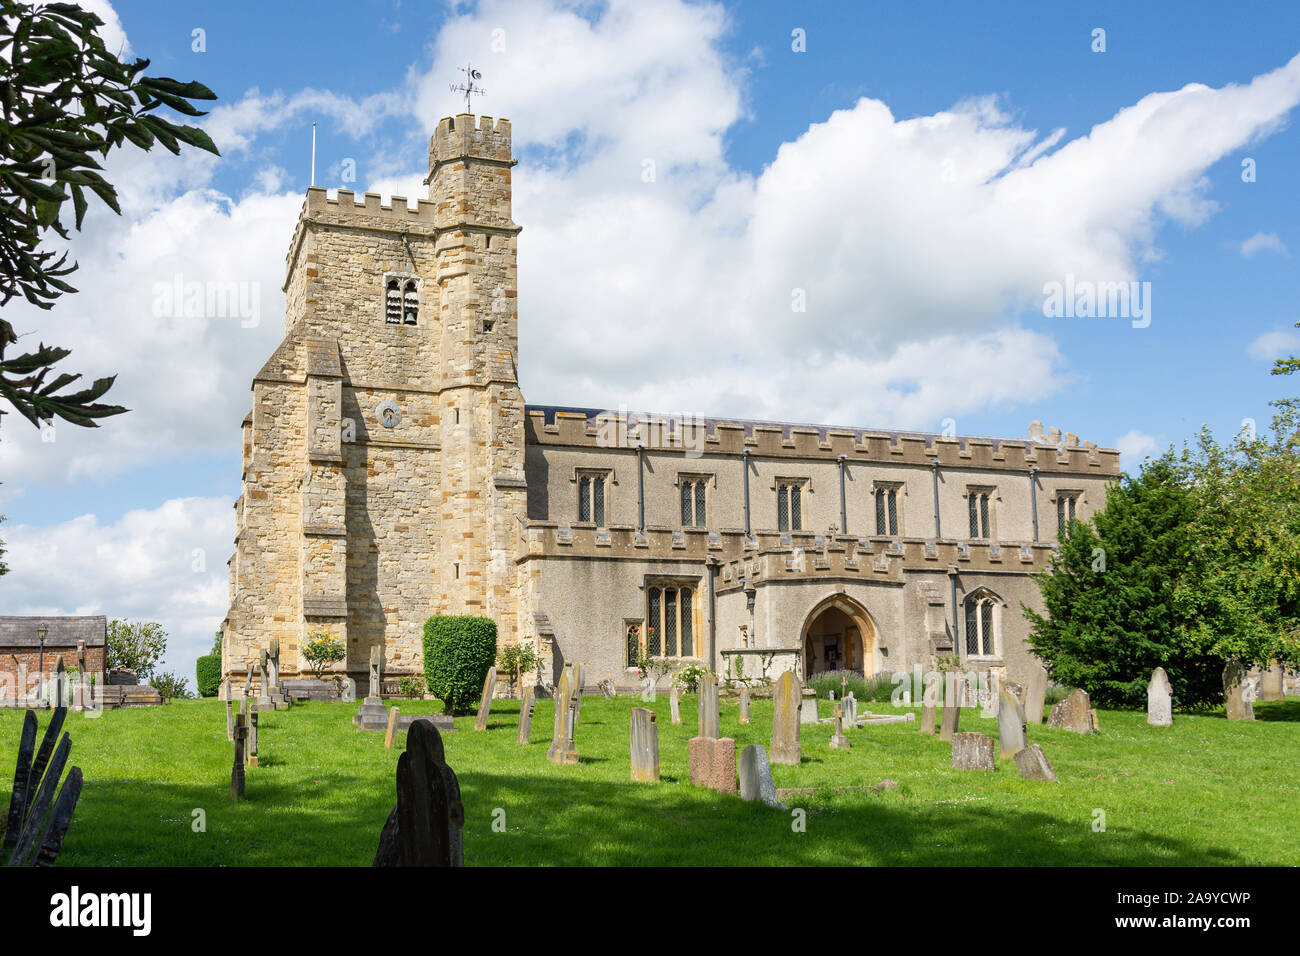 St Michael and All Angels' Church, High Street, Waddesdon, Buckinghamshire, Angleterre, Royaume-Uni Banque D'Images